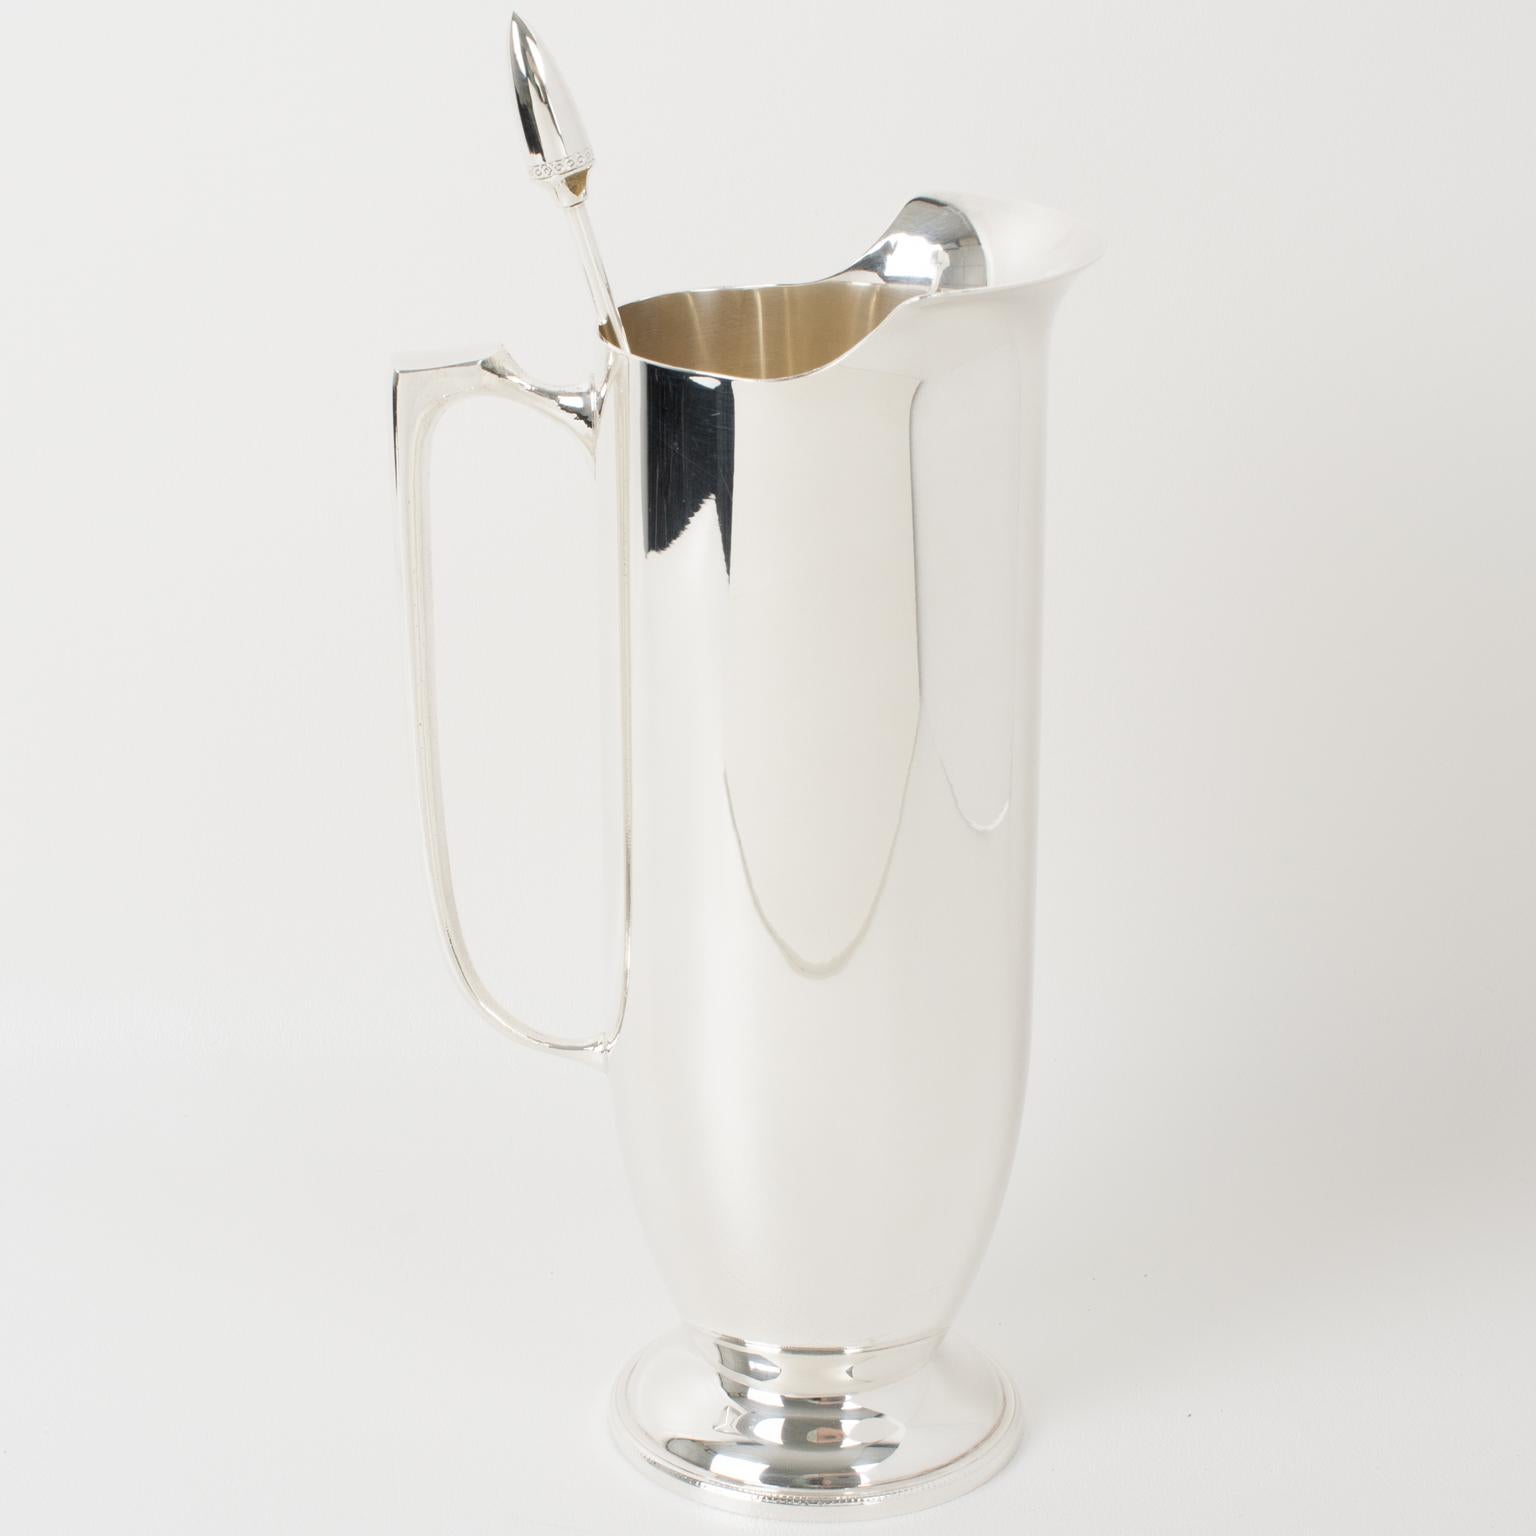 Elegant silver plate cocktail or Martini pitcher with stirrer by silversmith Towle for William Adams. Sleek and modernist shape with tall silver plate Martini pitcher or mixer jug and long stirrer spoon. Marked on the long spoon with legal